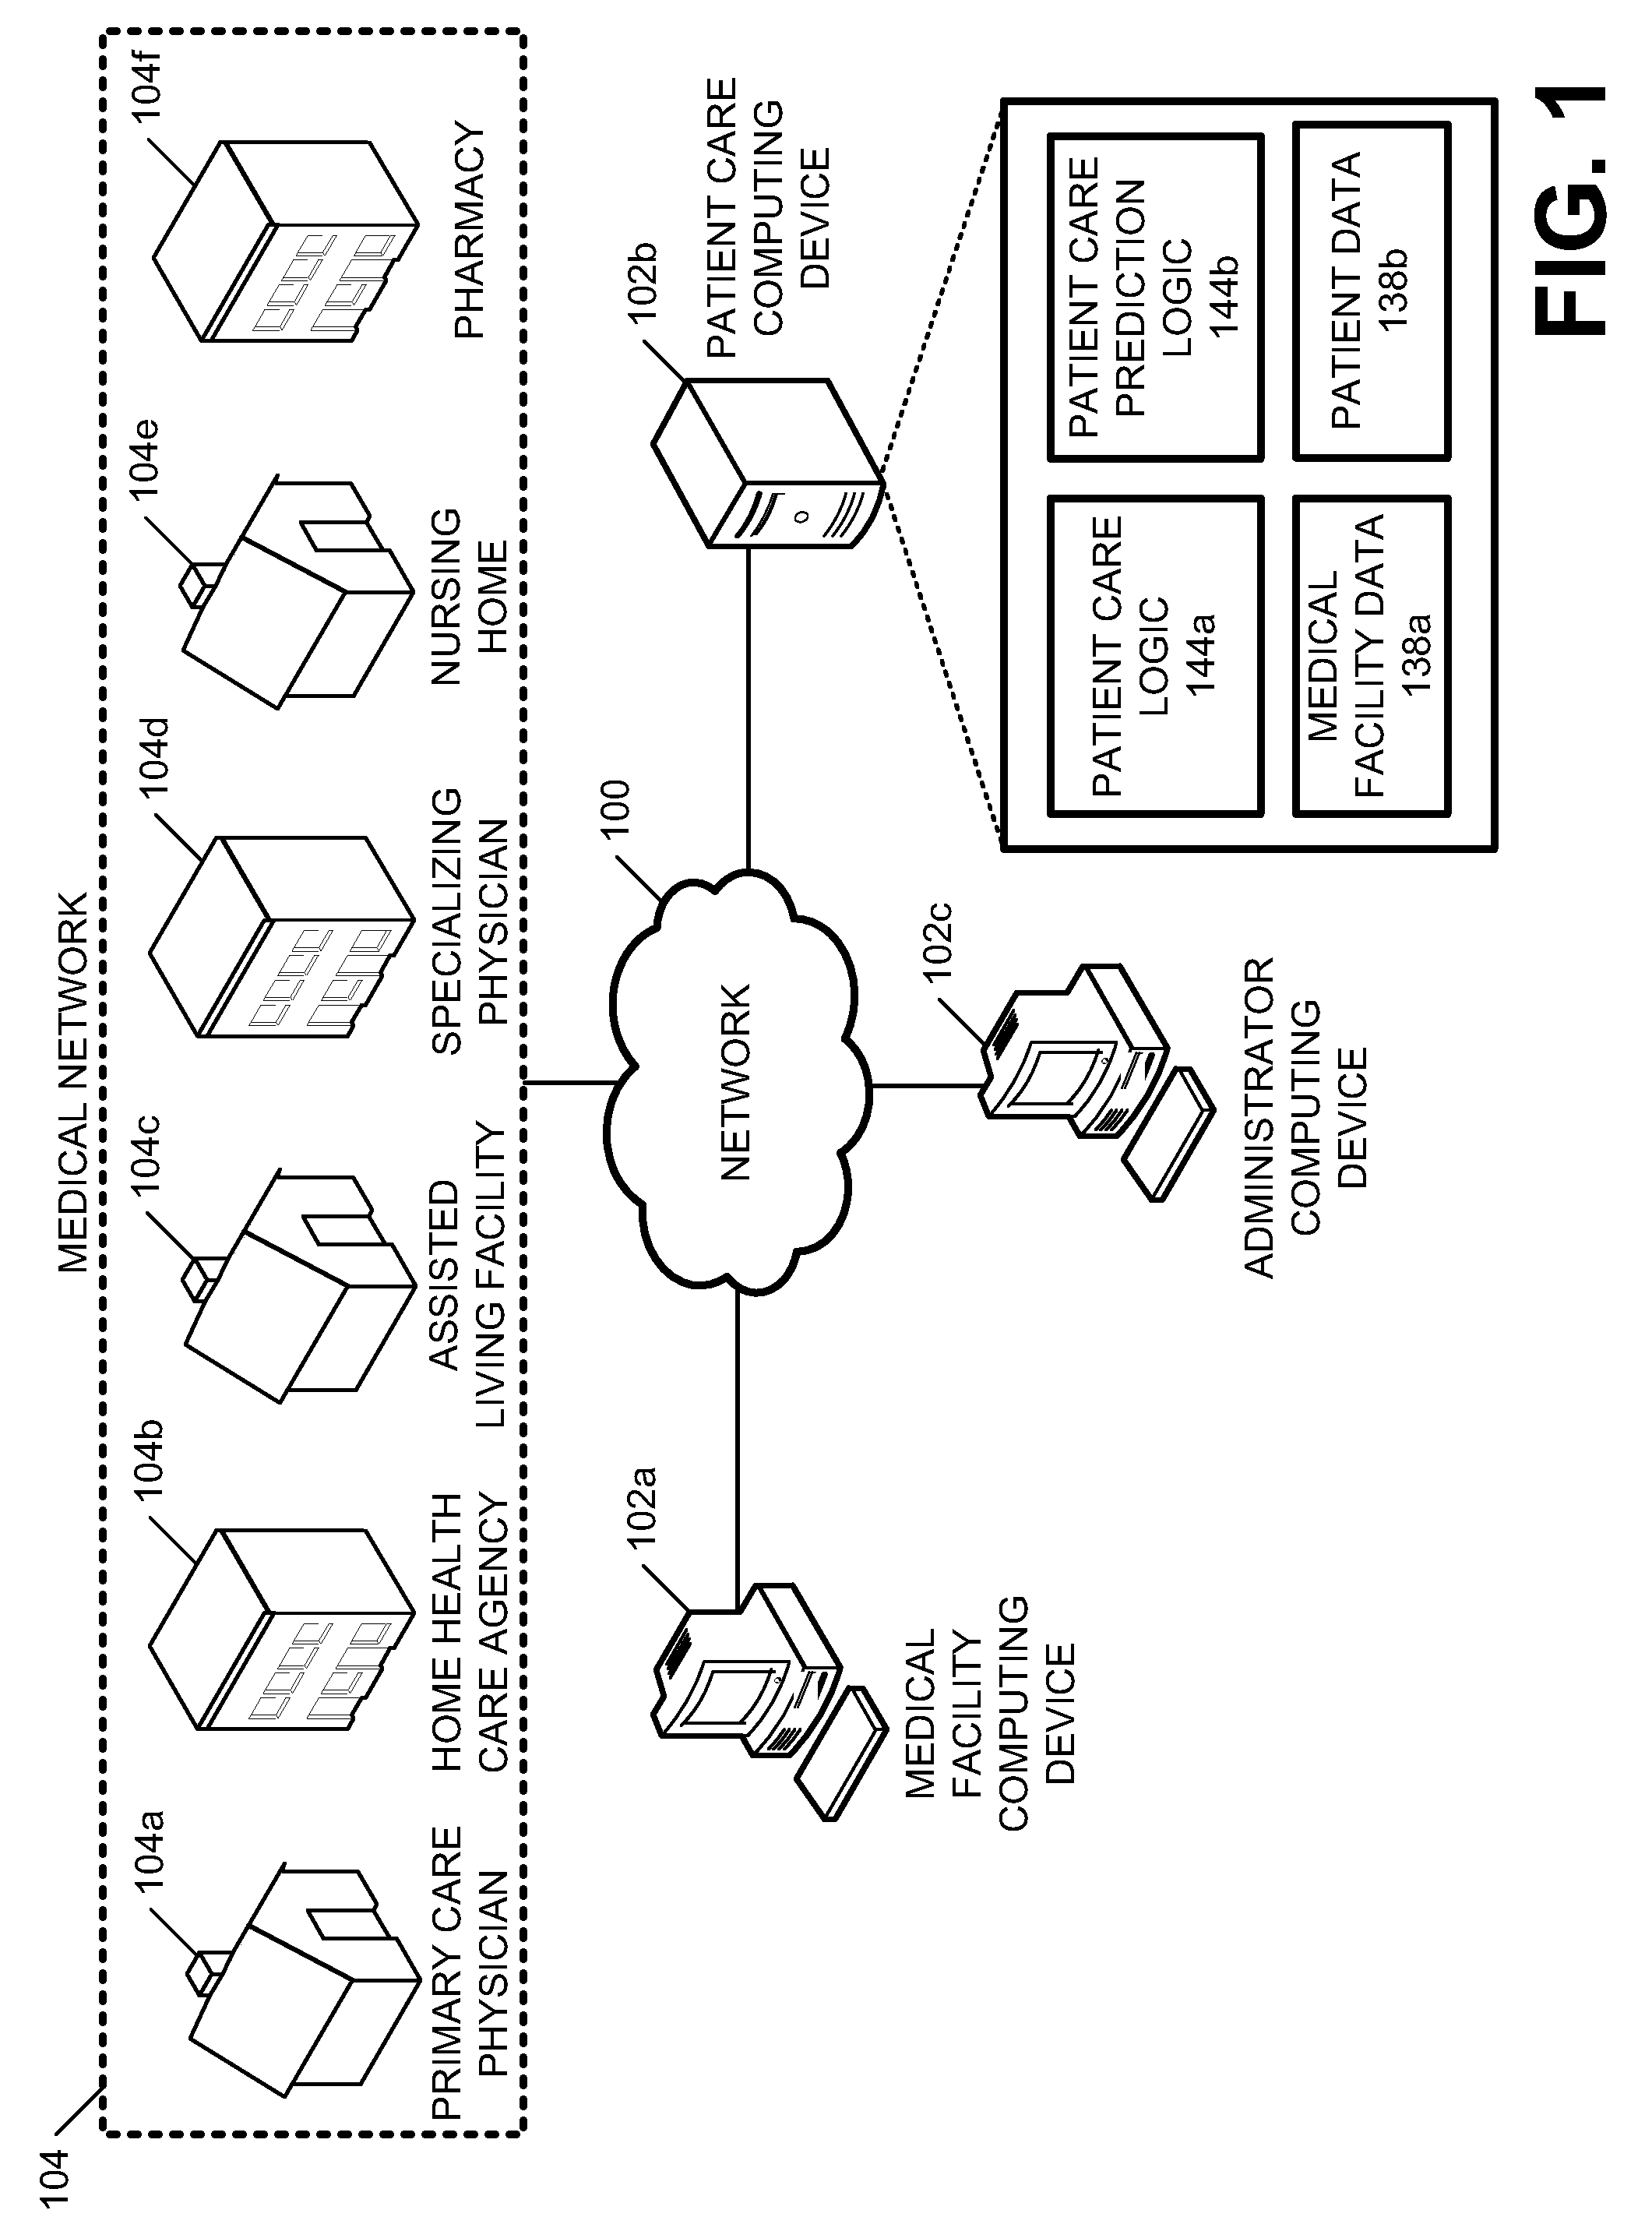 Systems and methods for providing a continuum of care